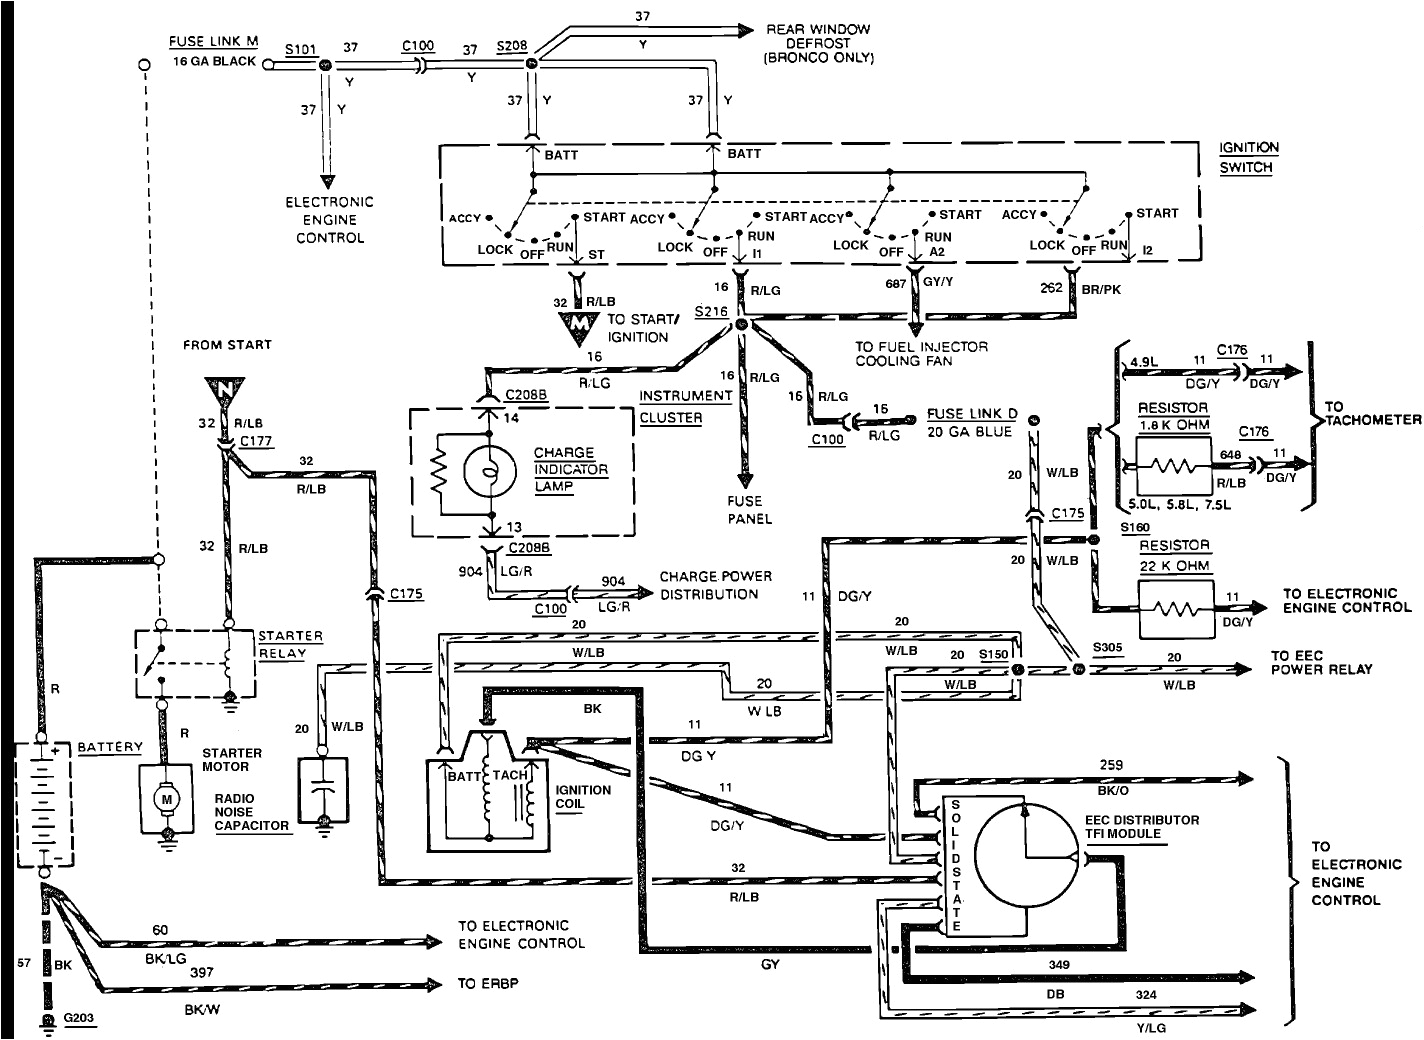 1990 ford f 150 ignition switch wiring diagram wiring diagram 1990 ford f 150 ignition switch